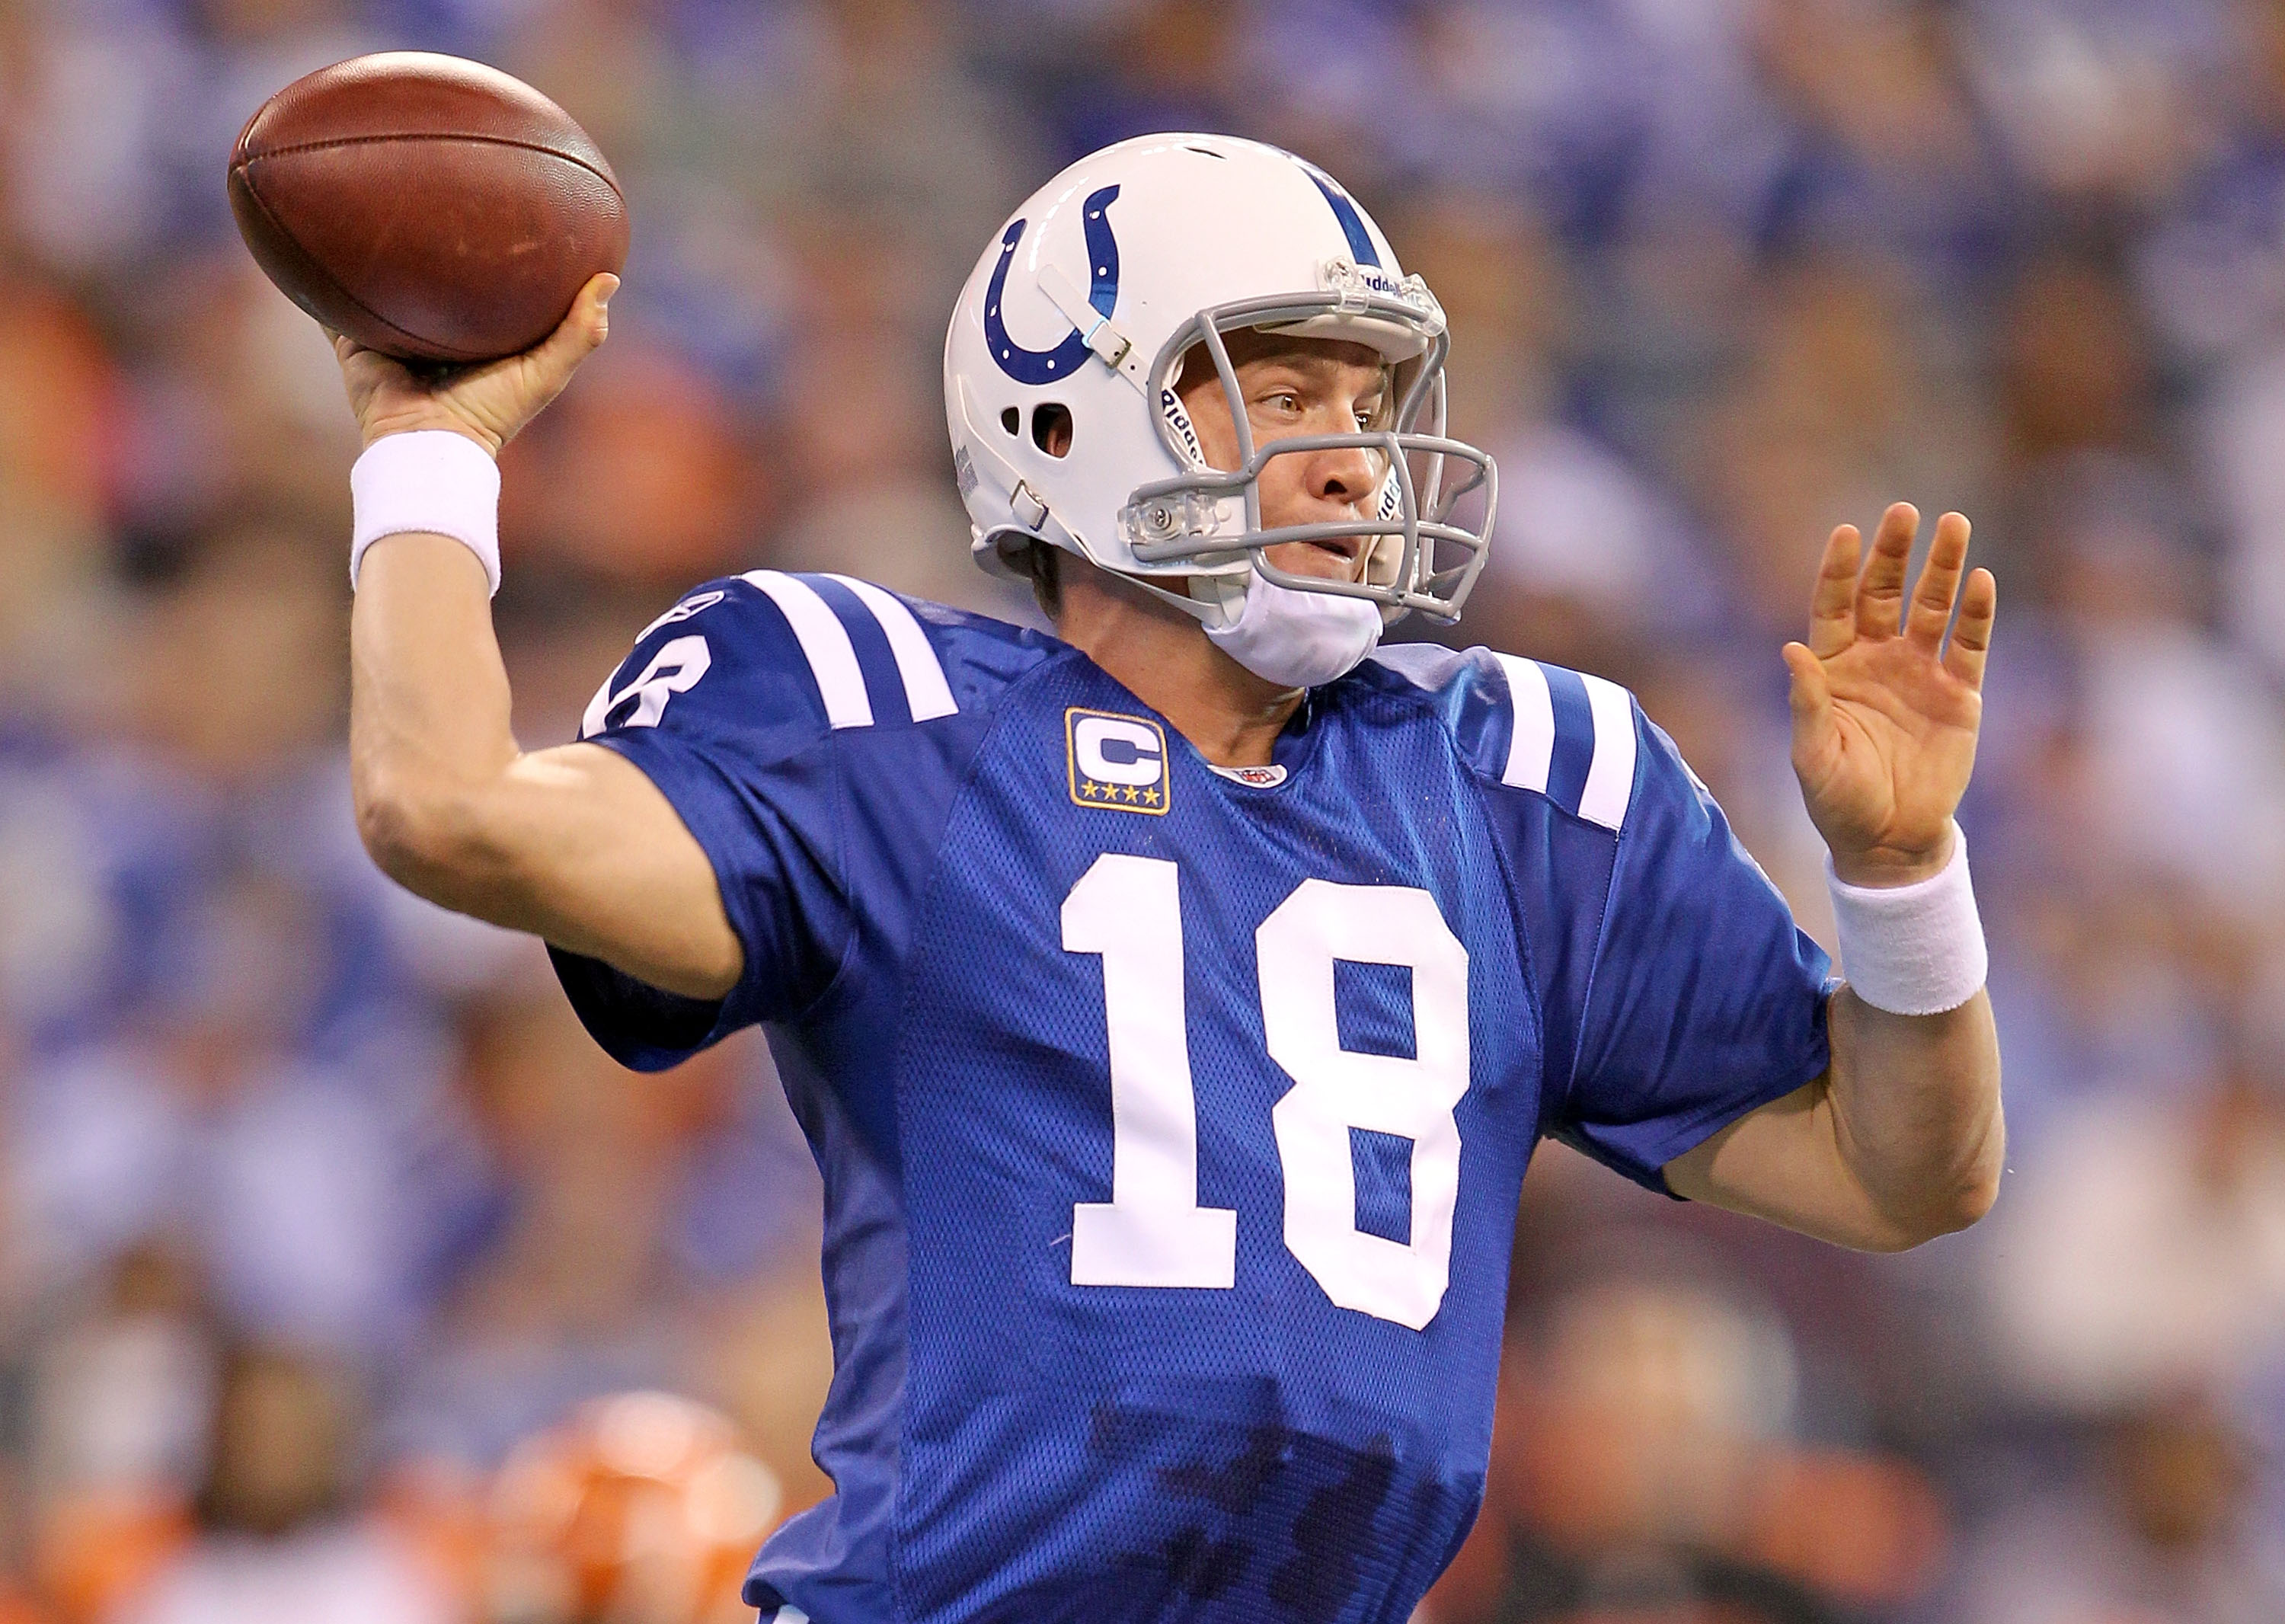 Which team did Peyton Manning spend the majority of his career with?